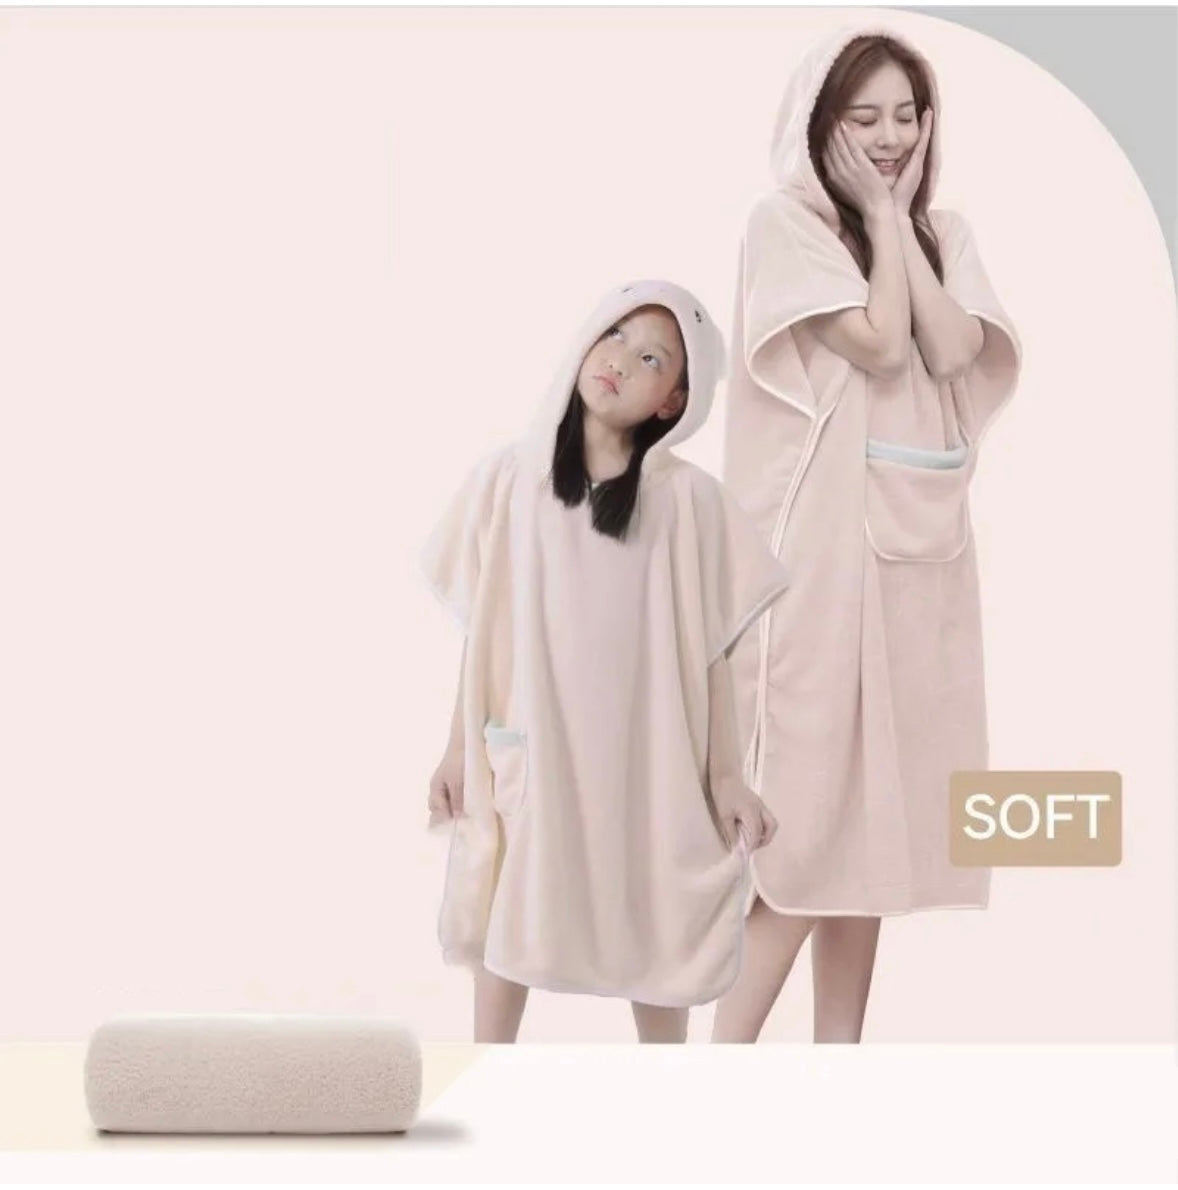 Showcasing Beige color Quick-Drying Hooded Bathrobe worn by a Woman and a Child